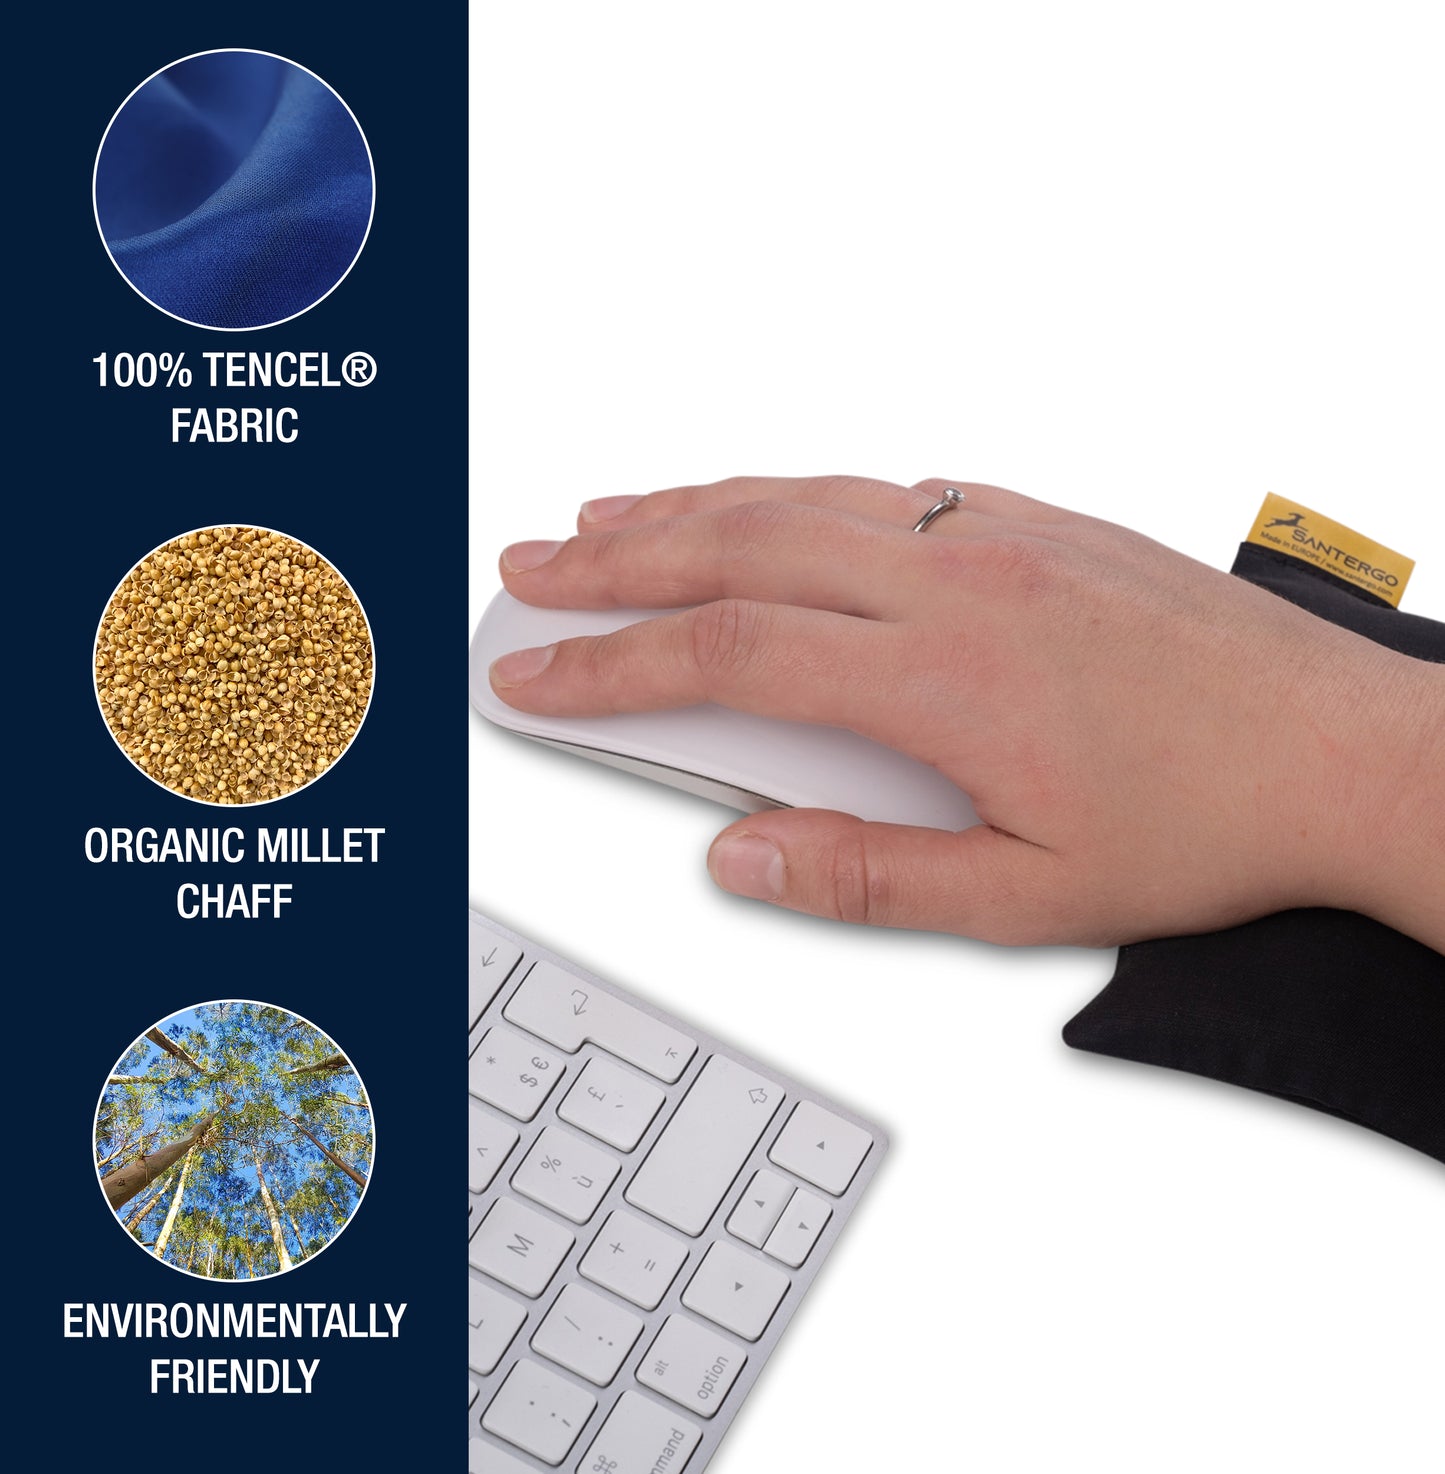 SANTERGO Mouse Pad (1.0-CLASSIC) Wrist Rest Ecological Ergonomic with Organic Millet Chaff, to Relieve the Wrists, Cushion Support, Easy Typing, Office, Computer, Pillow made of TENCEL® fabric